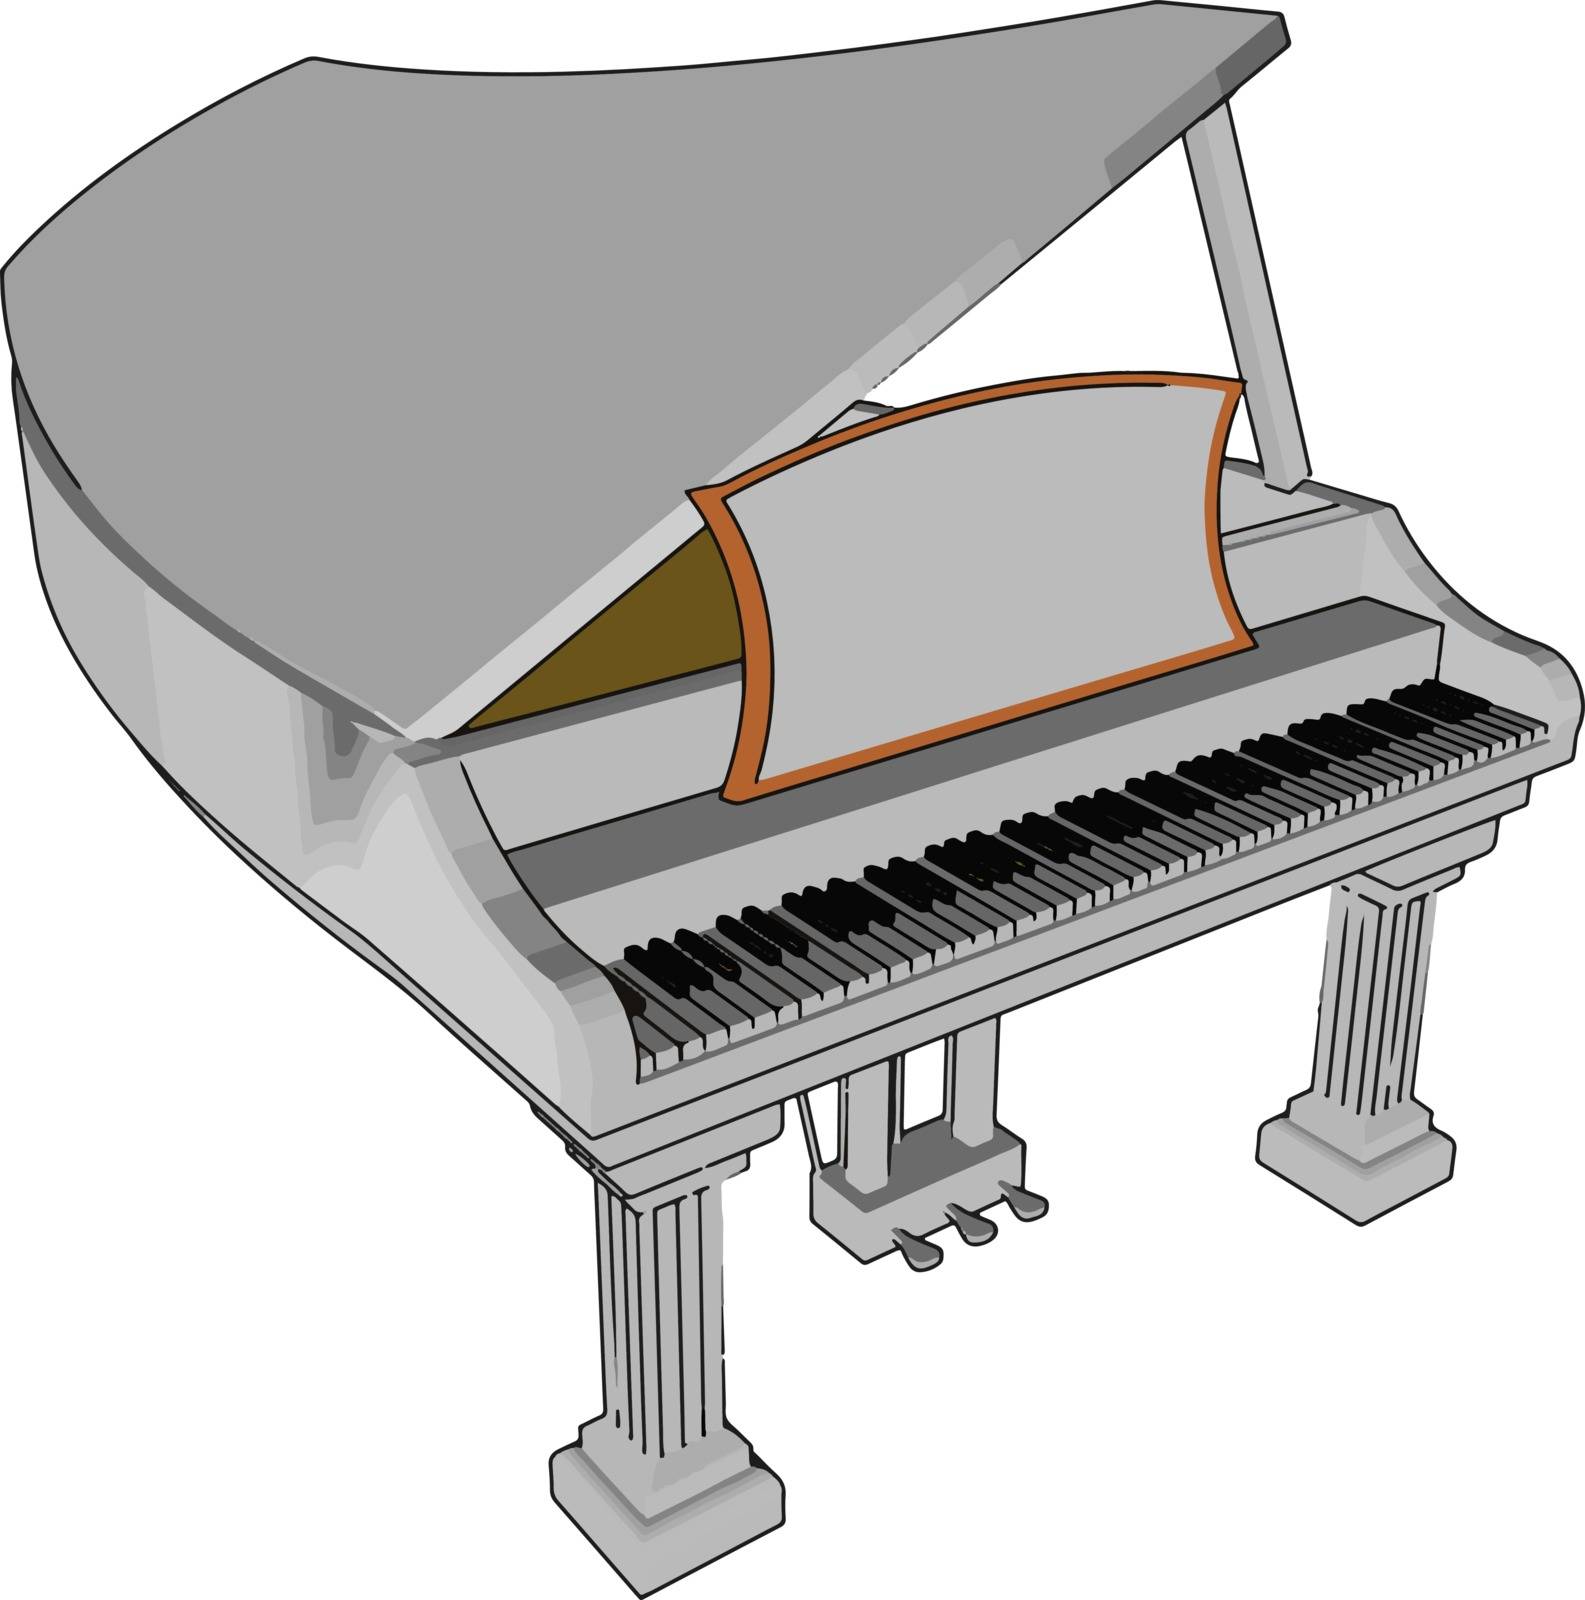 Piano can have many individual parts supporting six functional features: keyboard hammers dampers bridge soundboard and strings vector color drawing or illustration